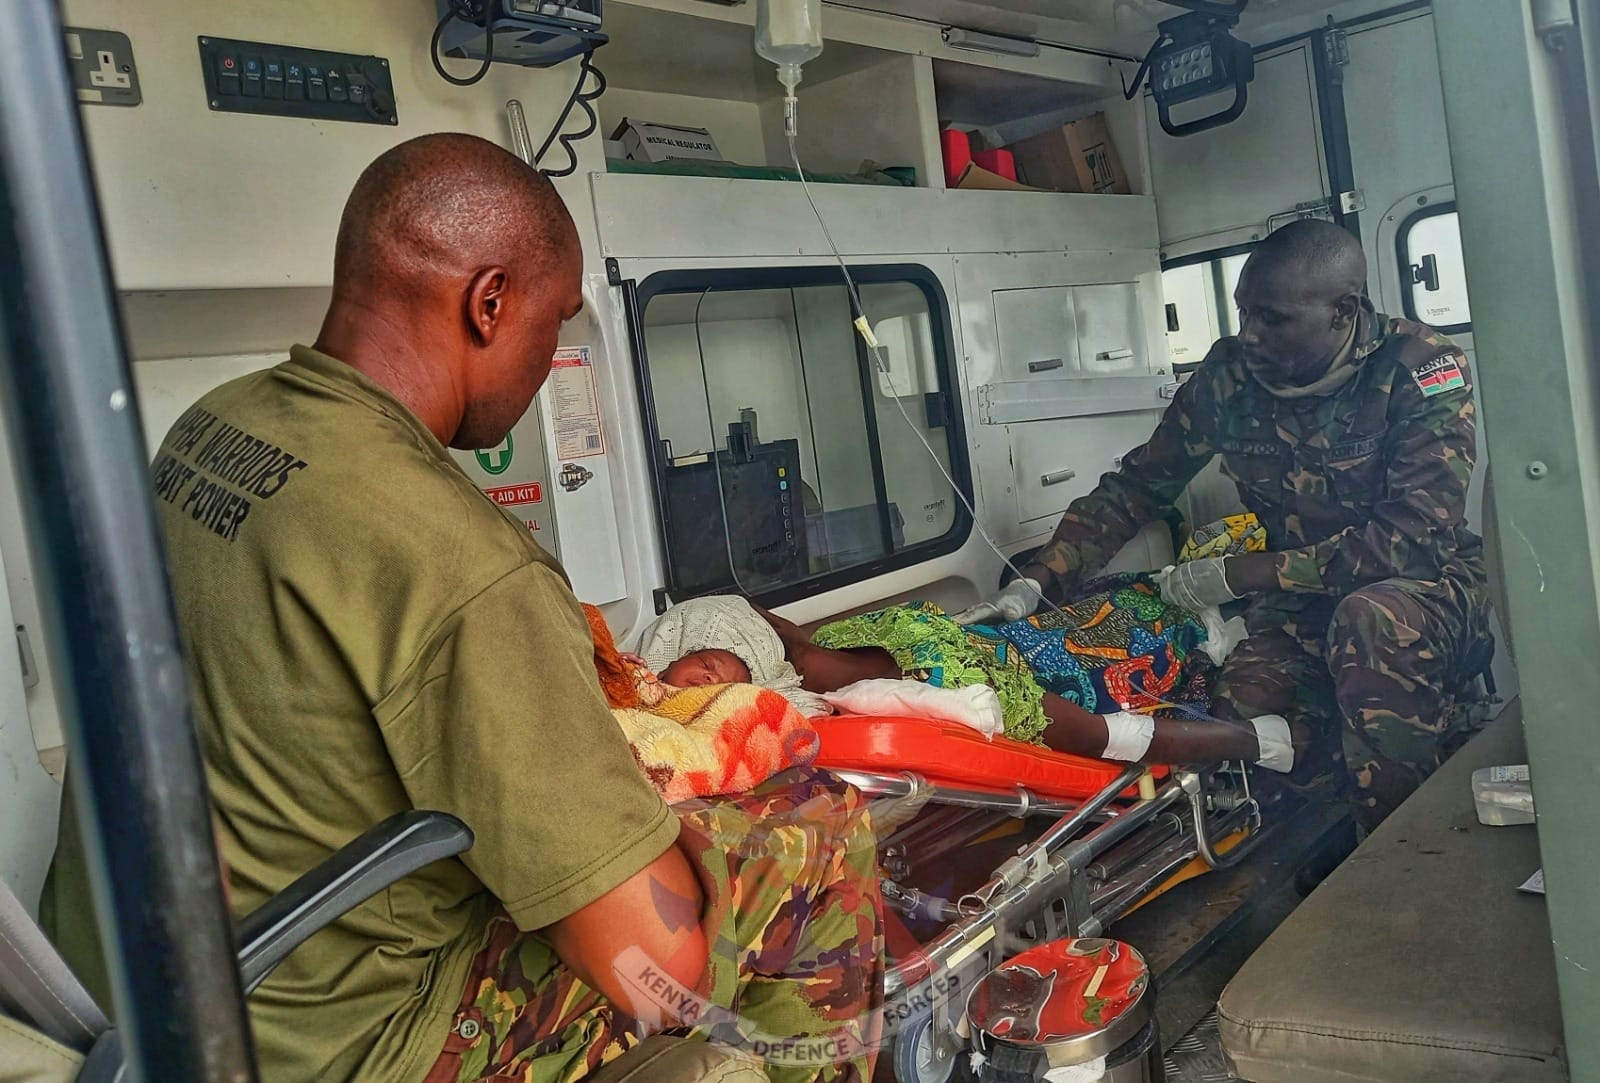 KDF soldiers help a woman deliver baby in DRC where they are conducting an operation.